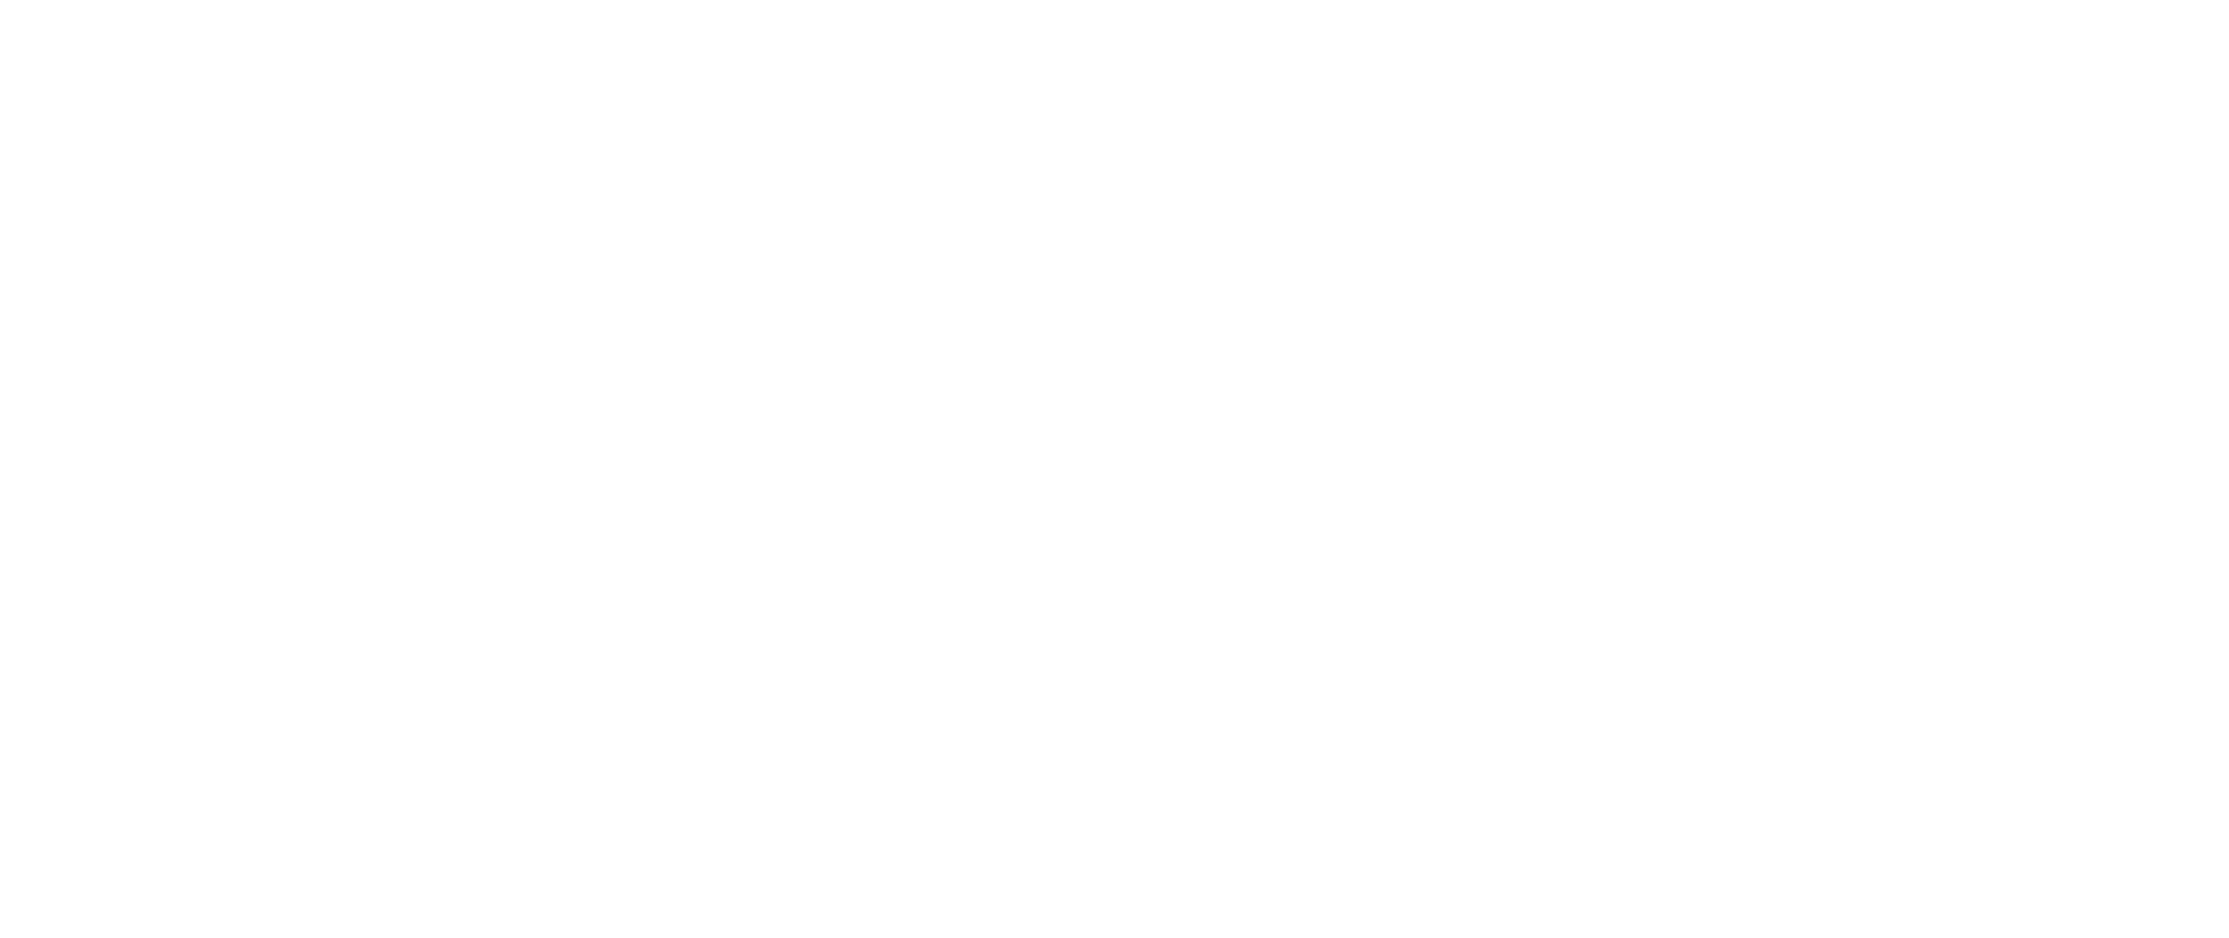 definition of critical thinking simple